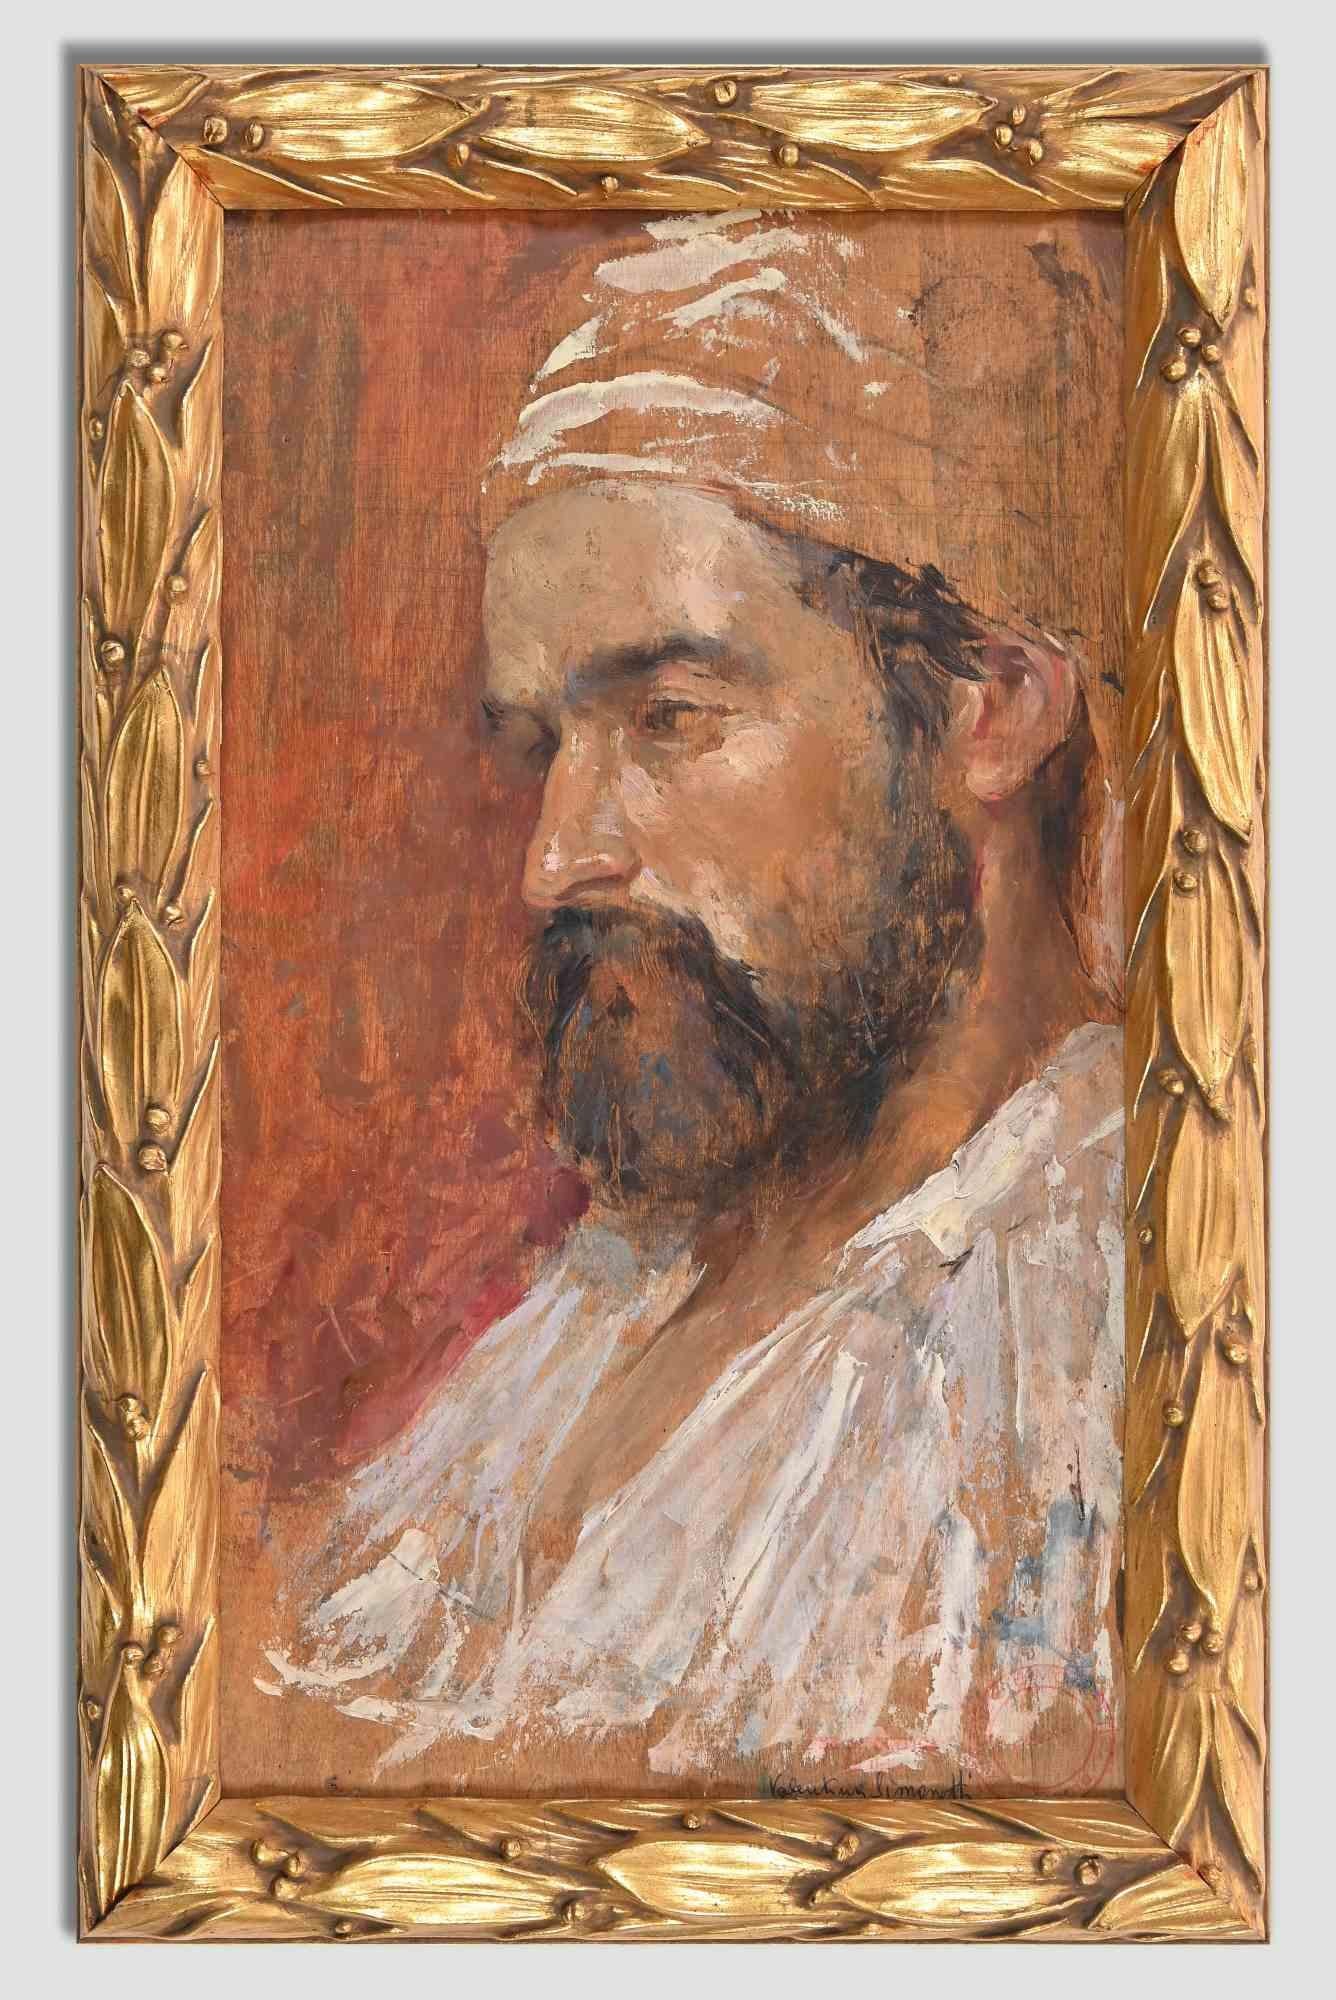 Two Orientalist Subjects -Oil on Panel by A. Momo Simonetti - Early 20th Century - Painting by Amedeo Momo Simonetti